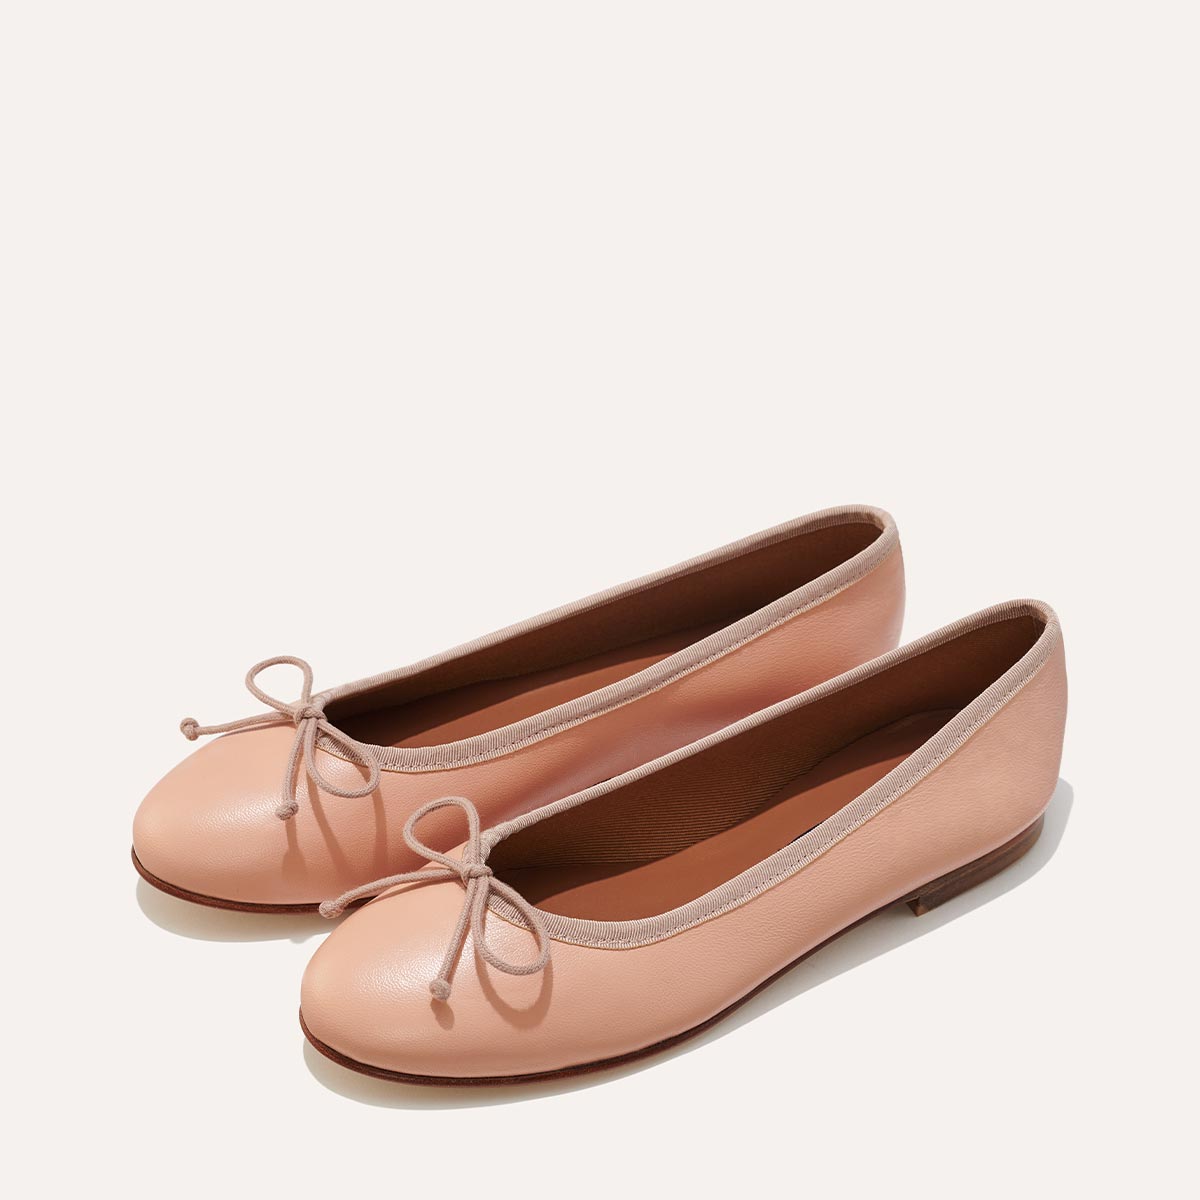 Margaux's classic and comfortable Demi ballet flat, made in a soft, pink Italian nappa leather 